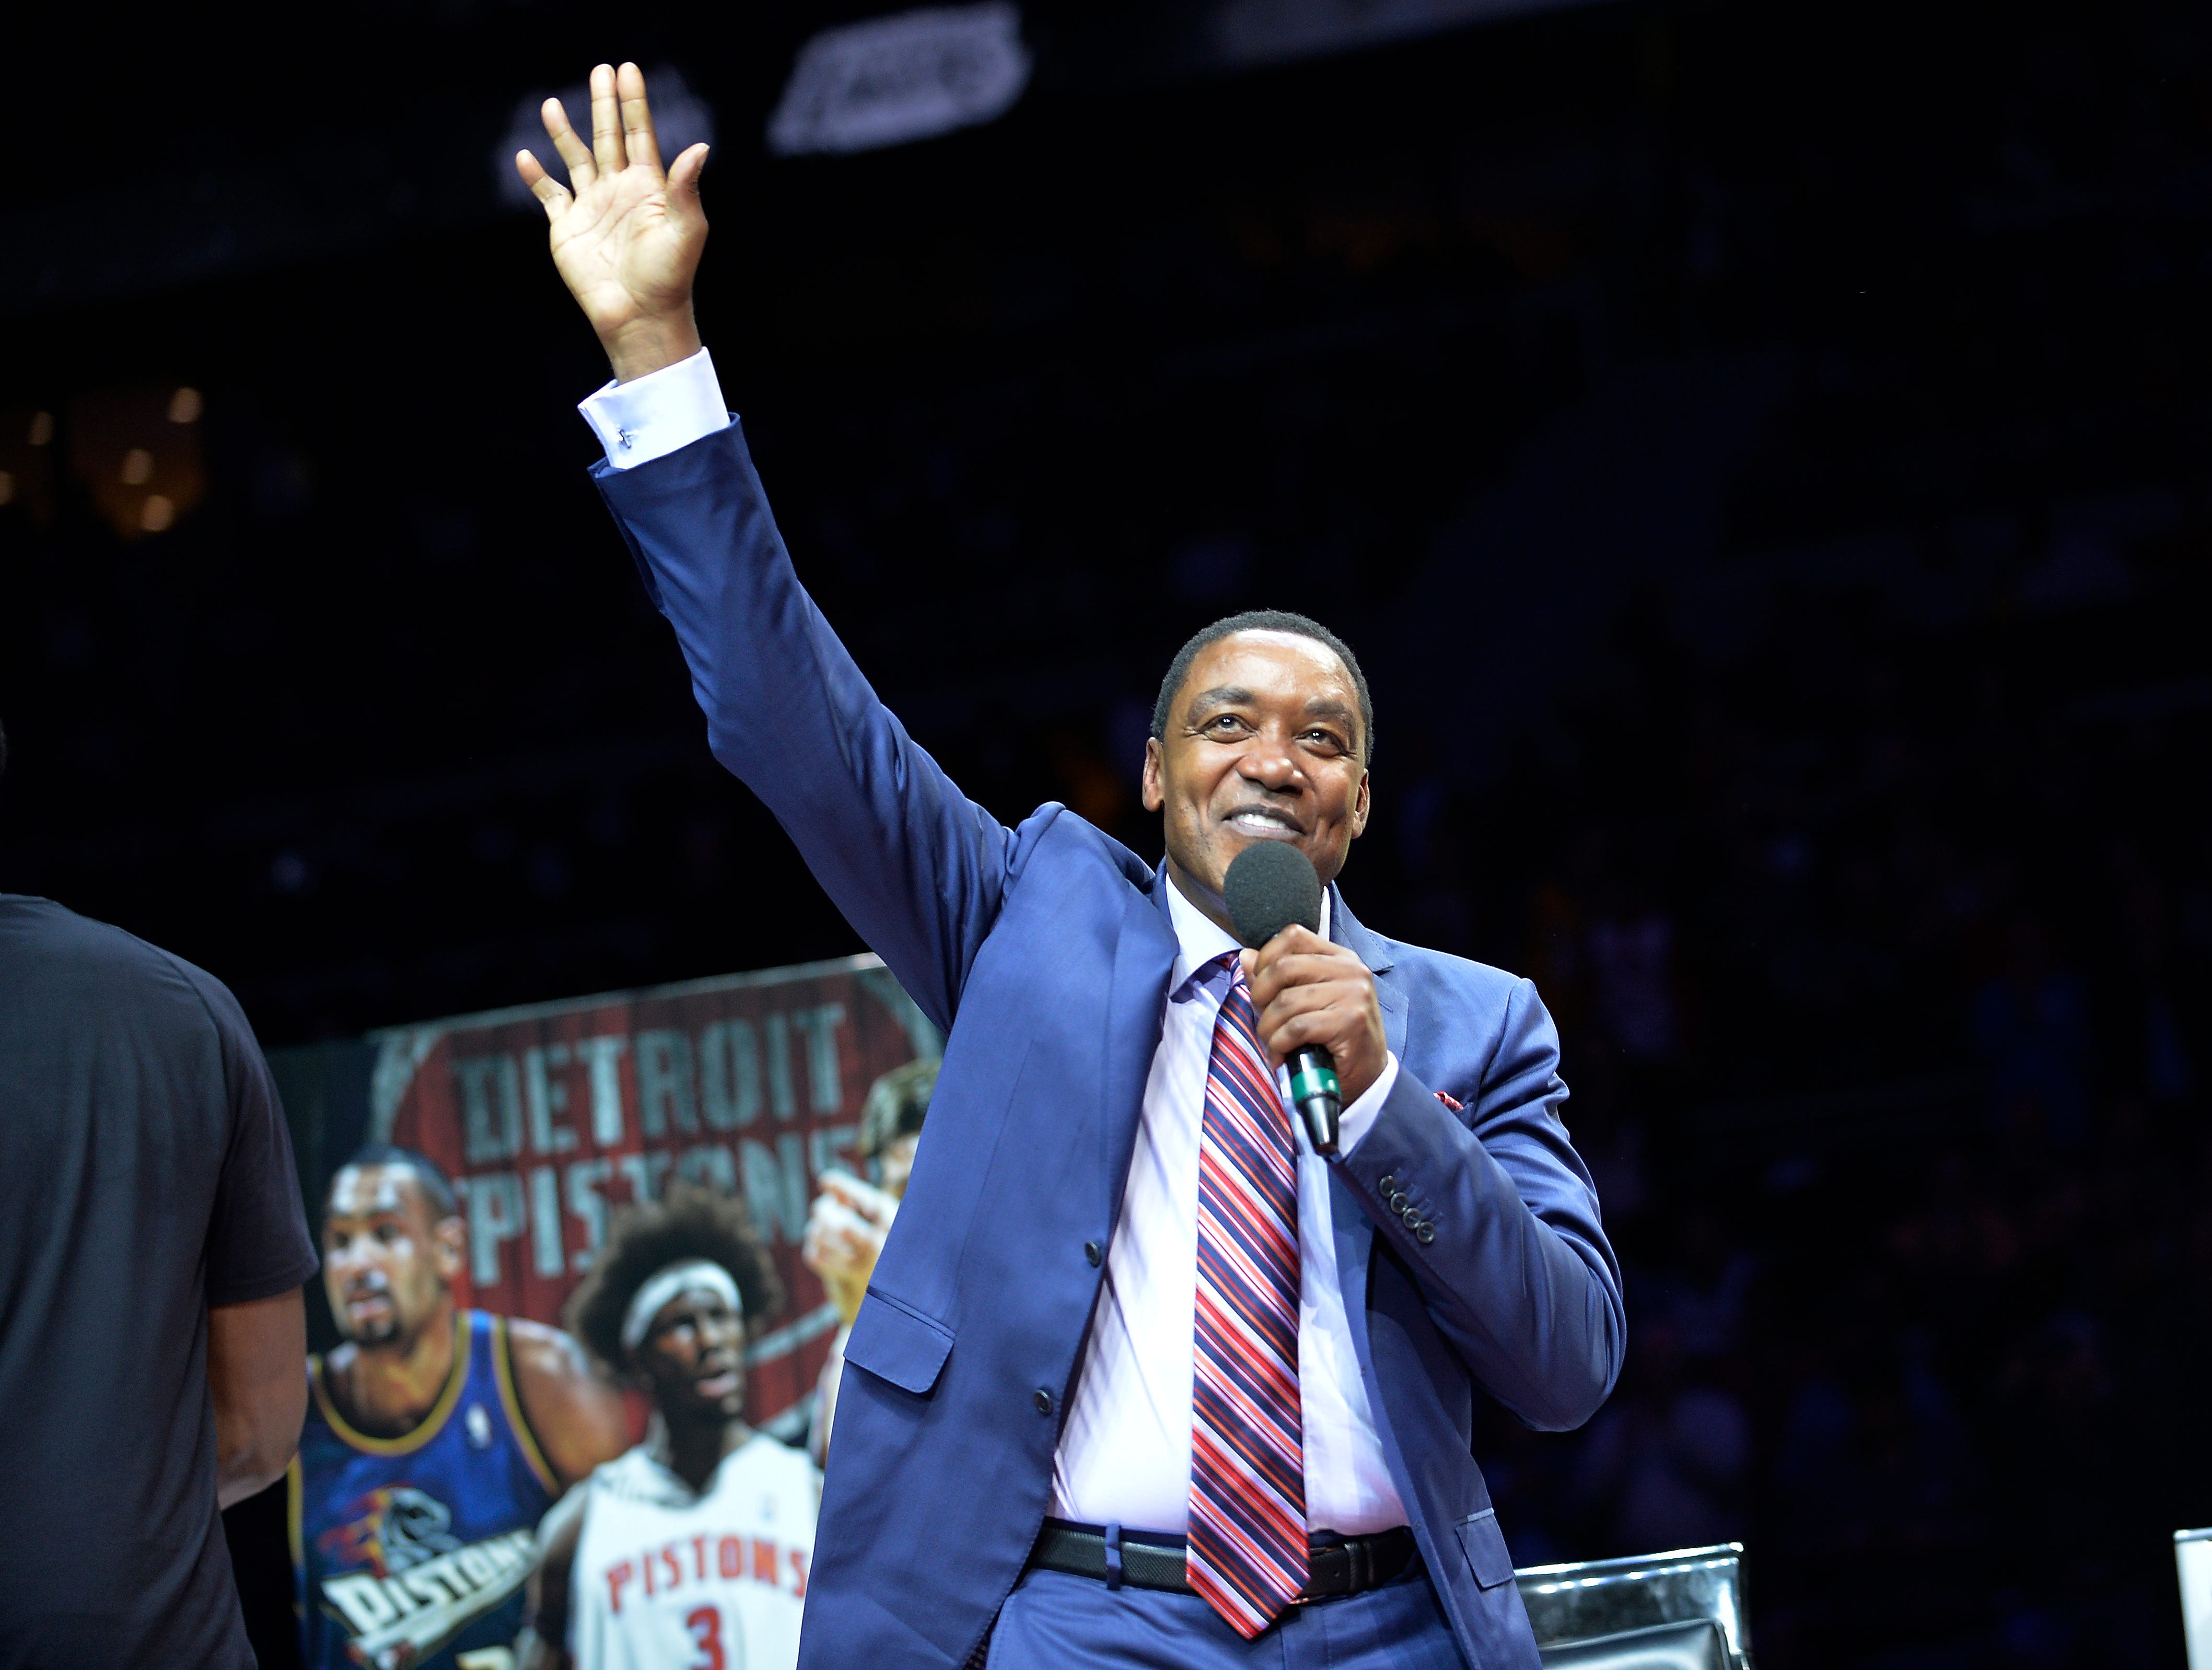 Isiah Thomas believes the Pistons' "Bad Boys" era, which included back-to-back NBA titles in 1989 and 1990, is largely forgotten in pro basketball lore.